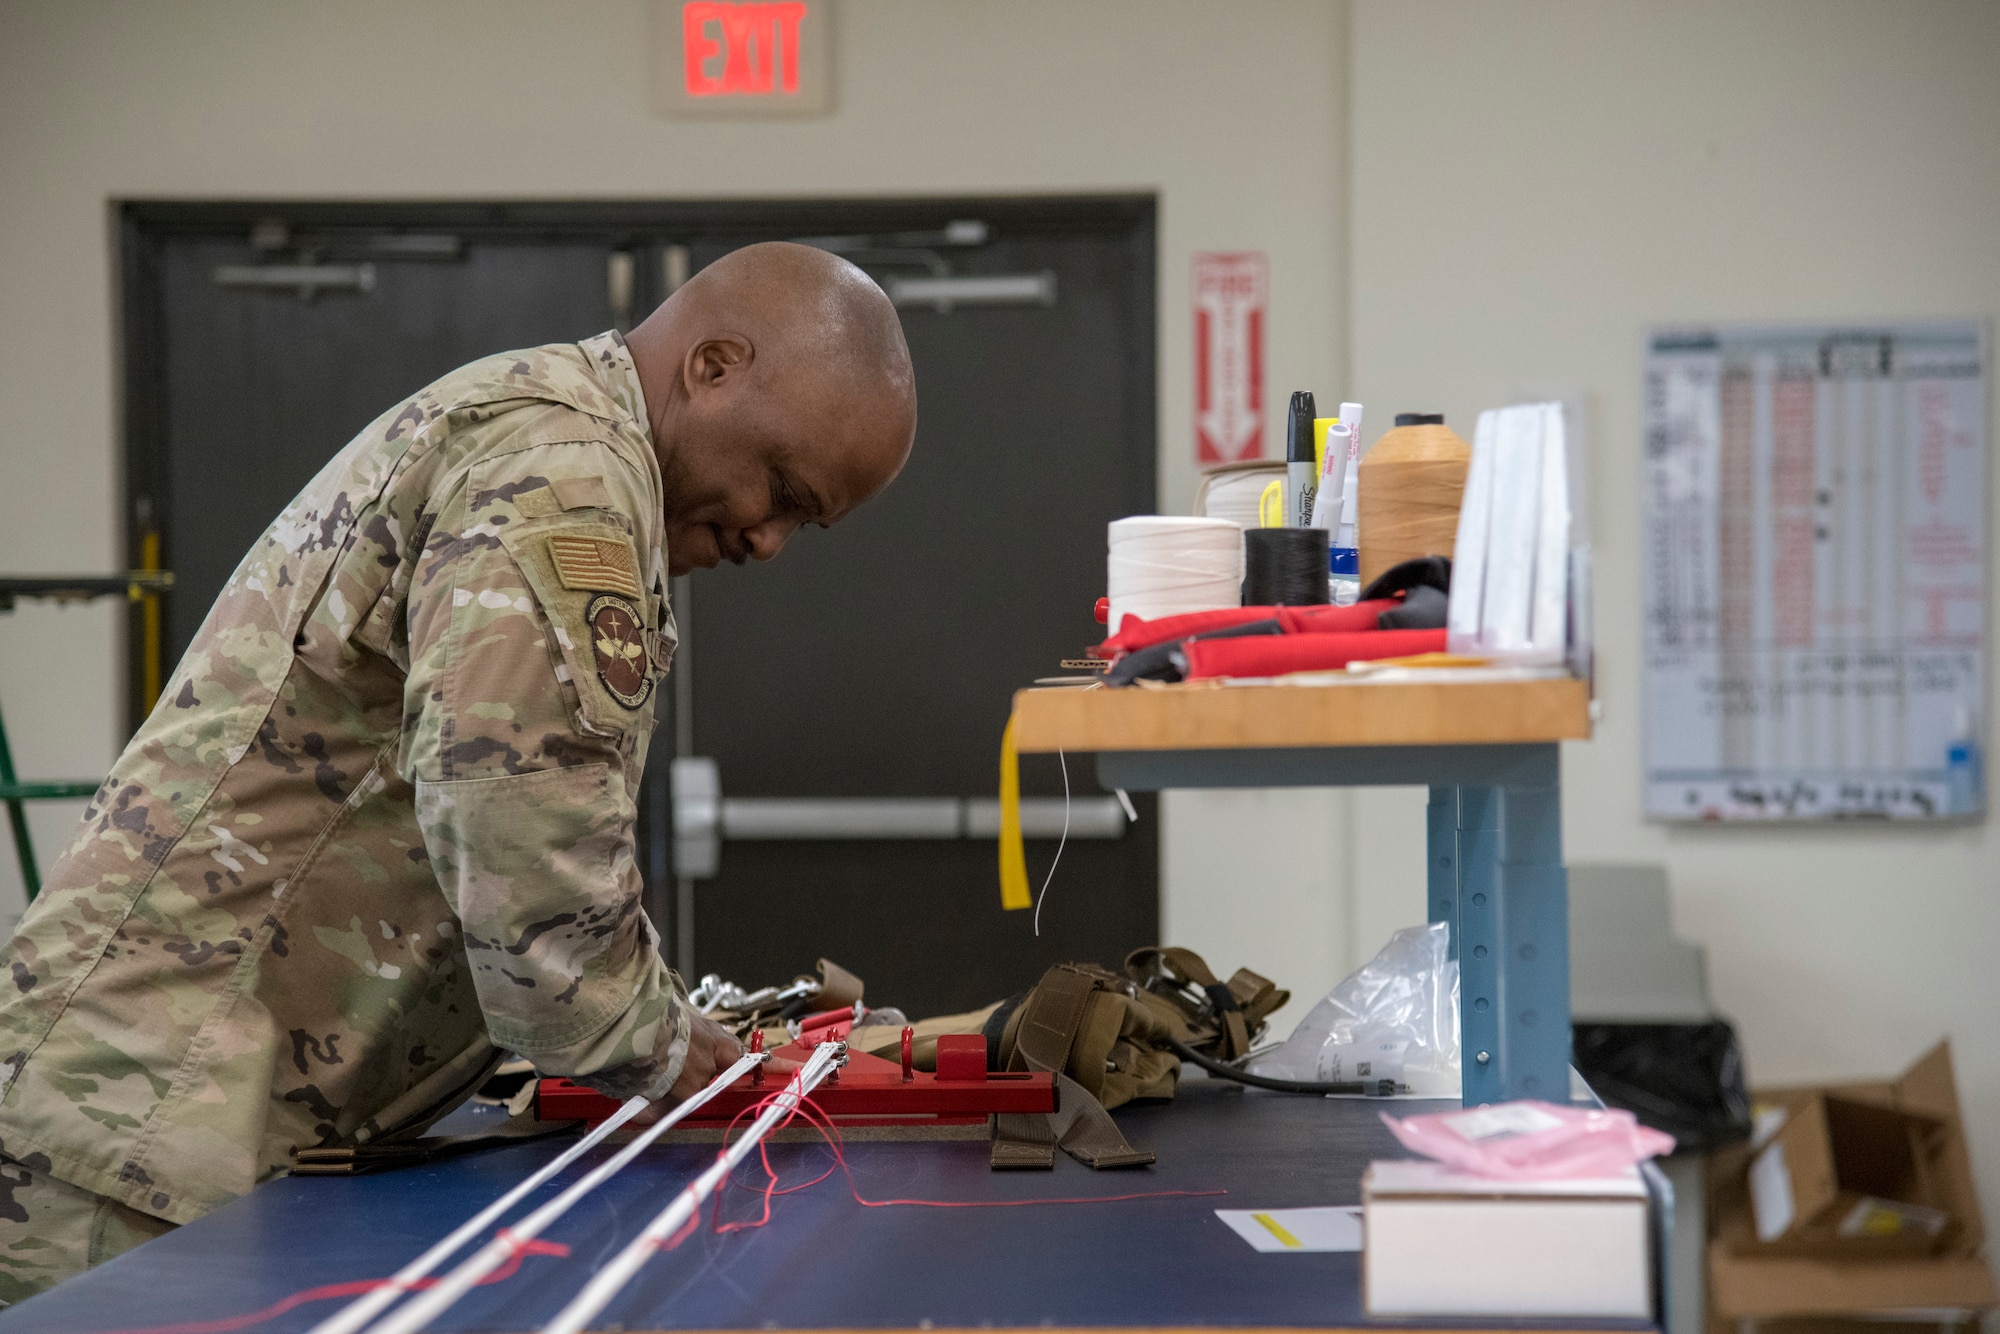 Tech. Sgt. Tyree Leverette, 403rd Operational Support Squadron aircrew flight equipment technician at Keesler Air Force Base, Miss., fastens the cords of a  BA-30 Low Profile Parachute system to an apparatus that facilitates the assembly and packing of the parachute into its backpack May 2, 2021. Gradually, the Air Force is making a branch-wide transition to the BA-30s for certain aircraft. (U.S. Air Force by Staff Sgt. Kristen Pittman)